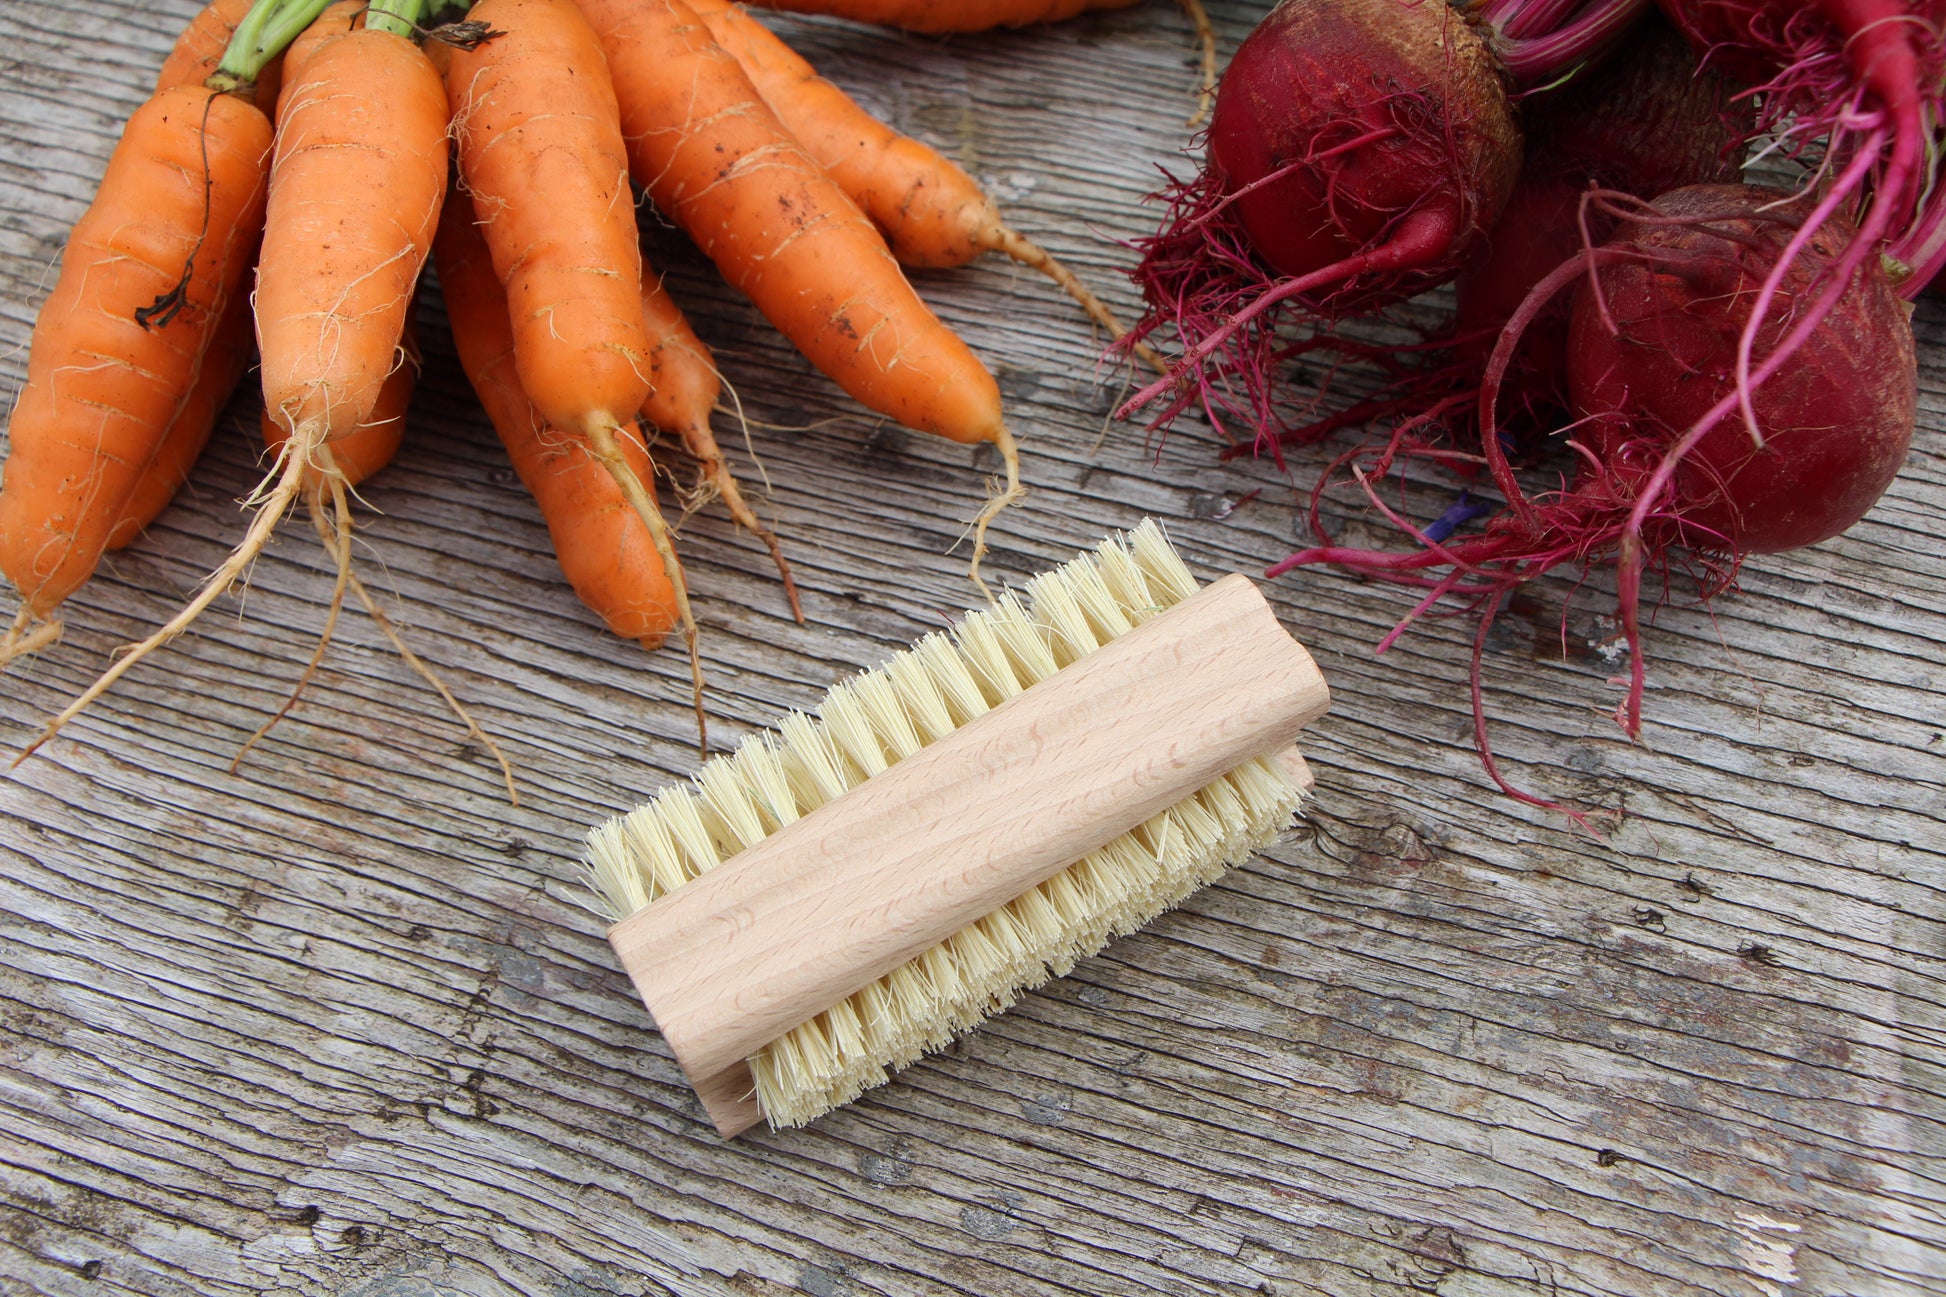 Double-sided scrub brush made of Tampico fibers and Ash wood pictured with beets and carrots